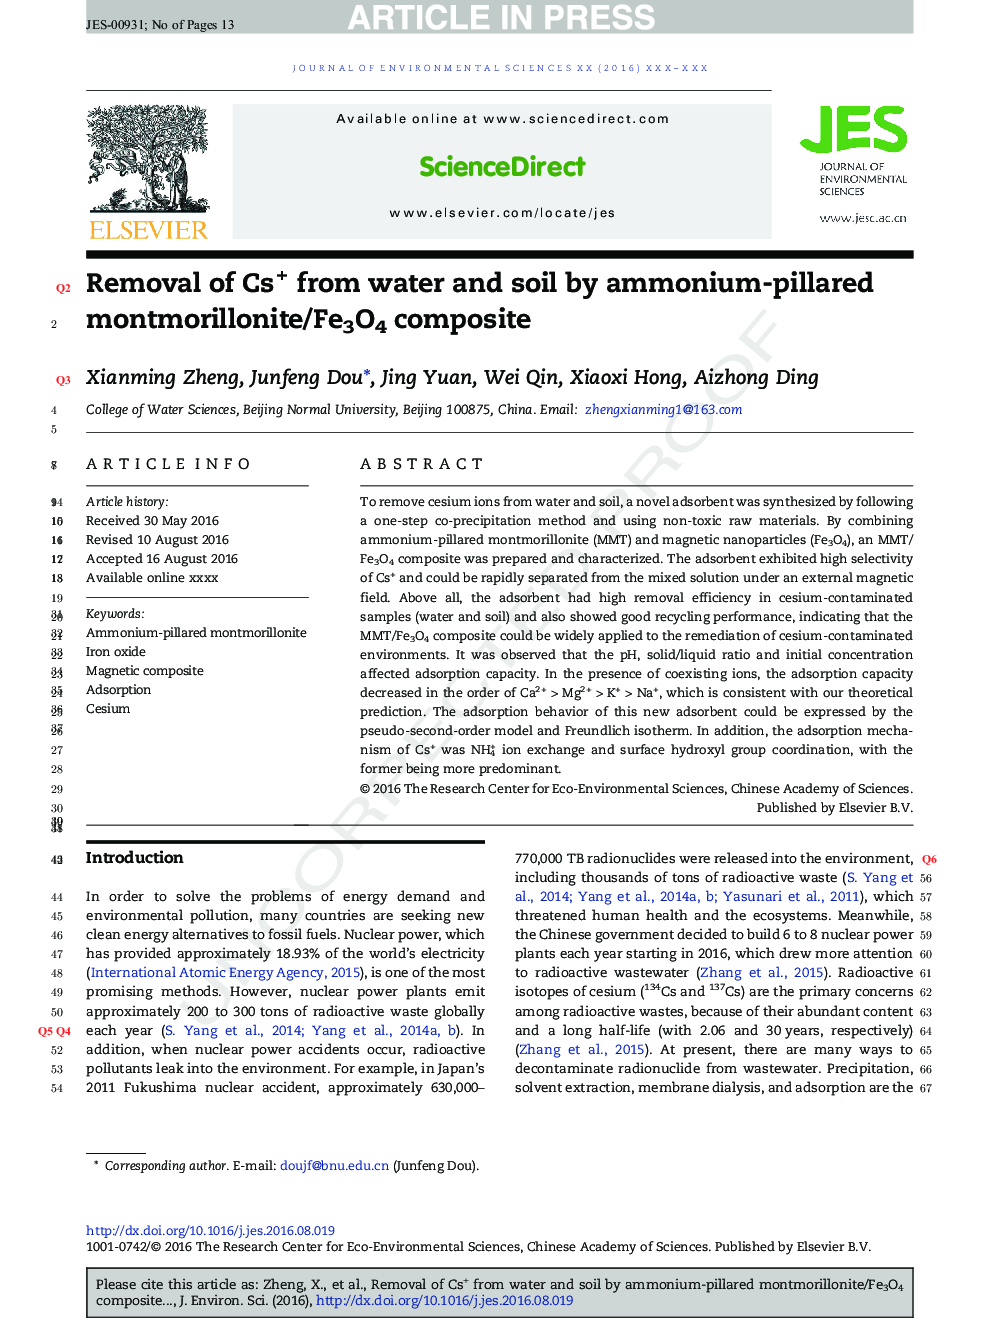 Removal of Cs+ from water and soil by ammonium-pillared montmorillonite/Fe3O4 composite